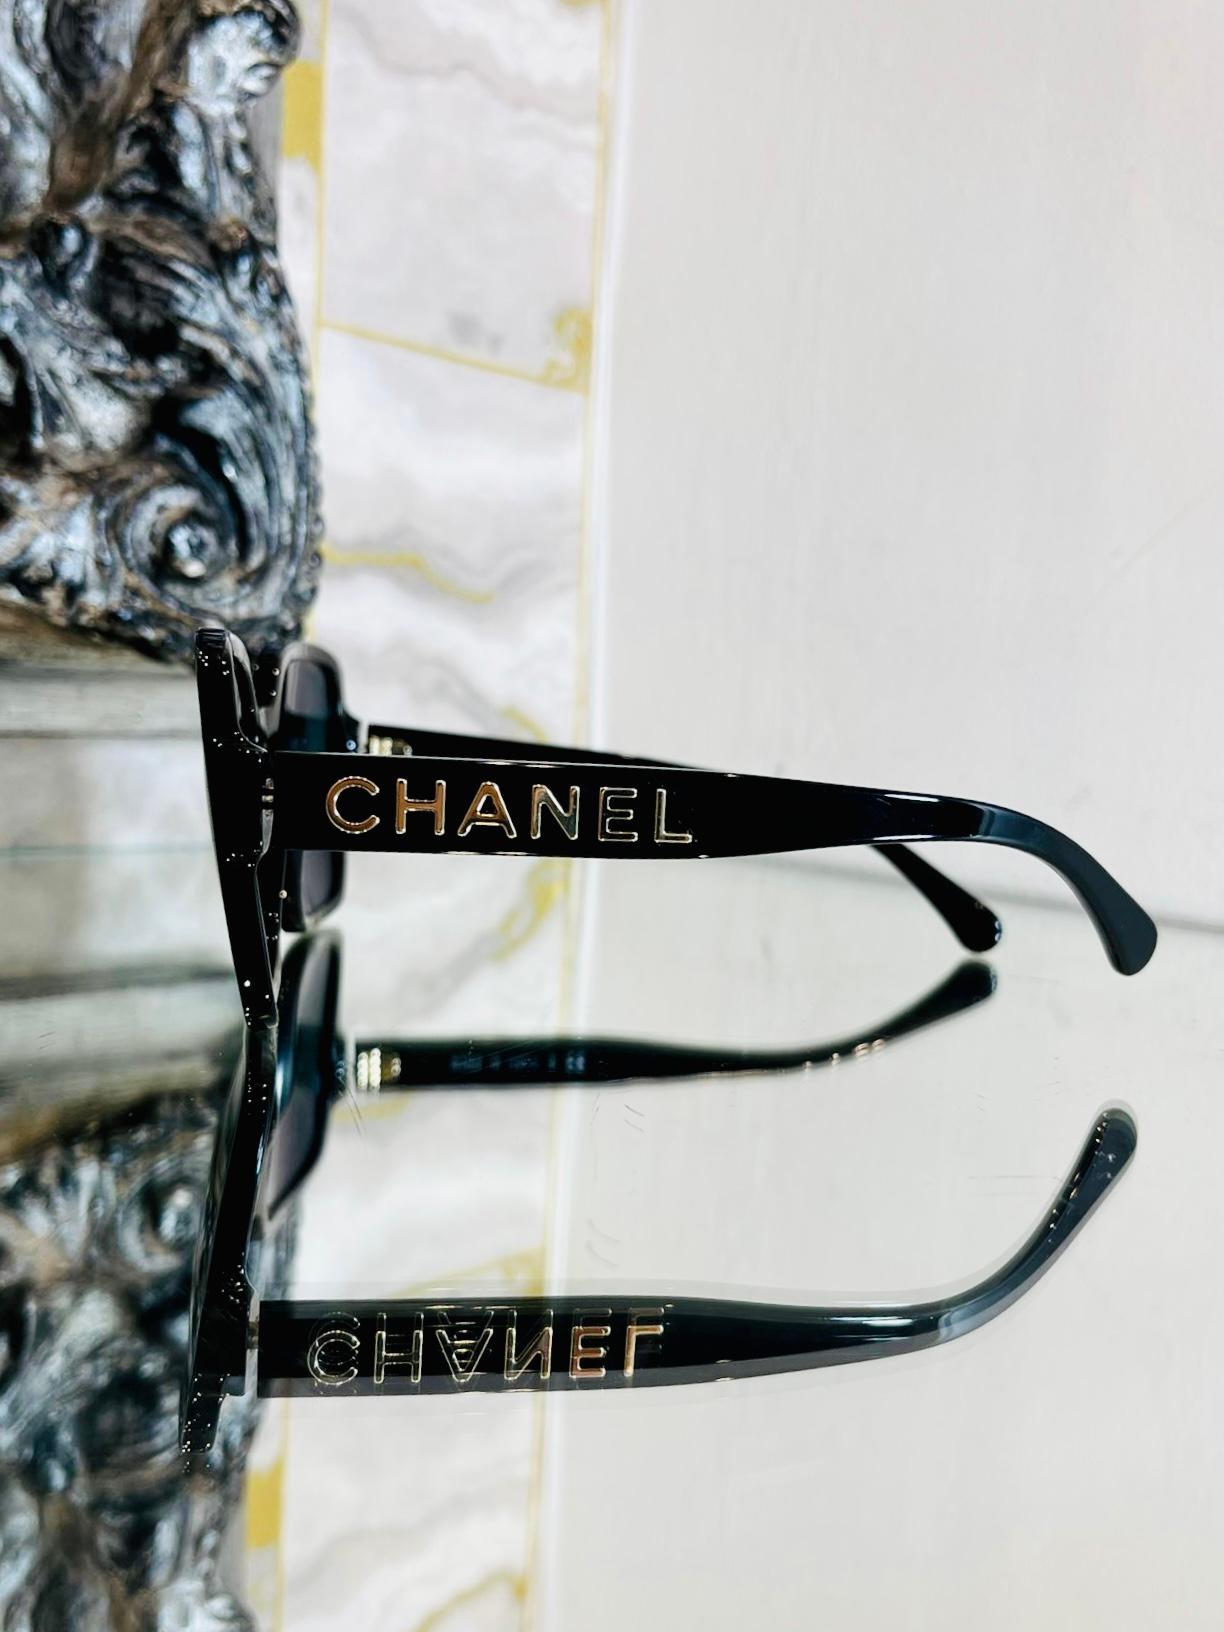 Women's Chanel Logo 'CHANEL' Sunglasses   Black acetate frames with gold 'CHANEL' letter For Sale